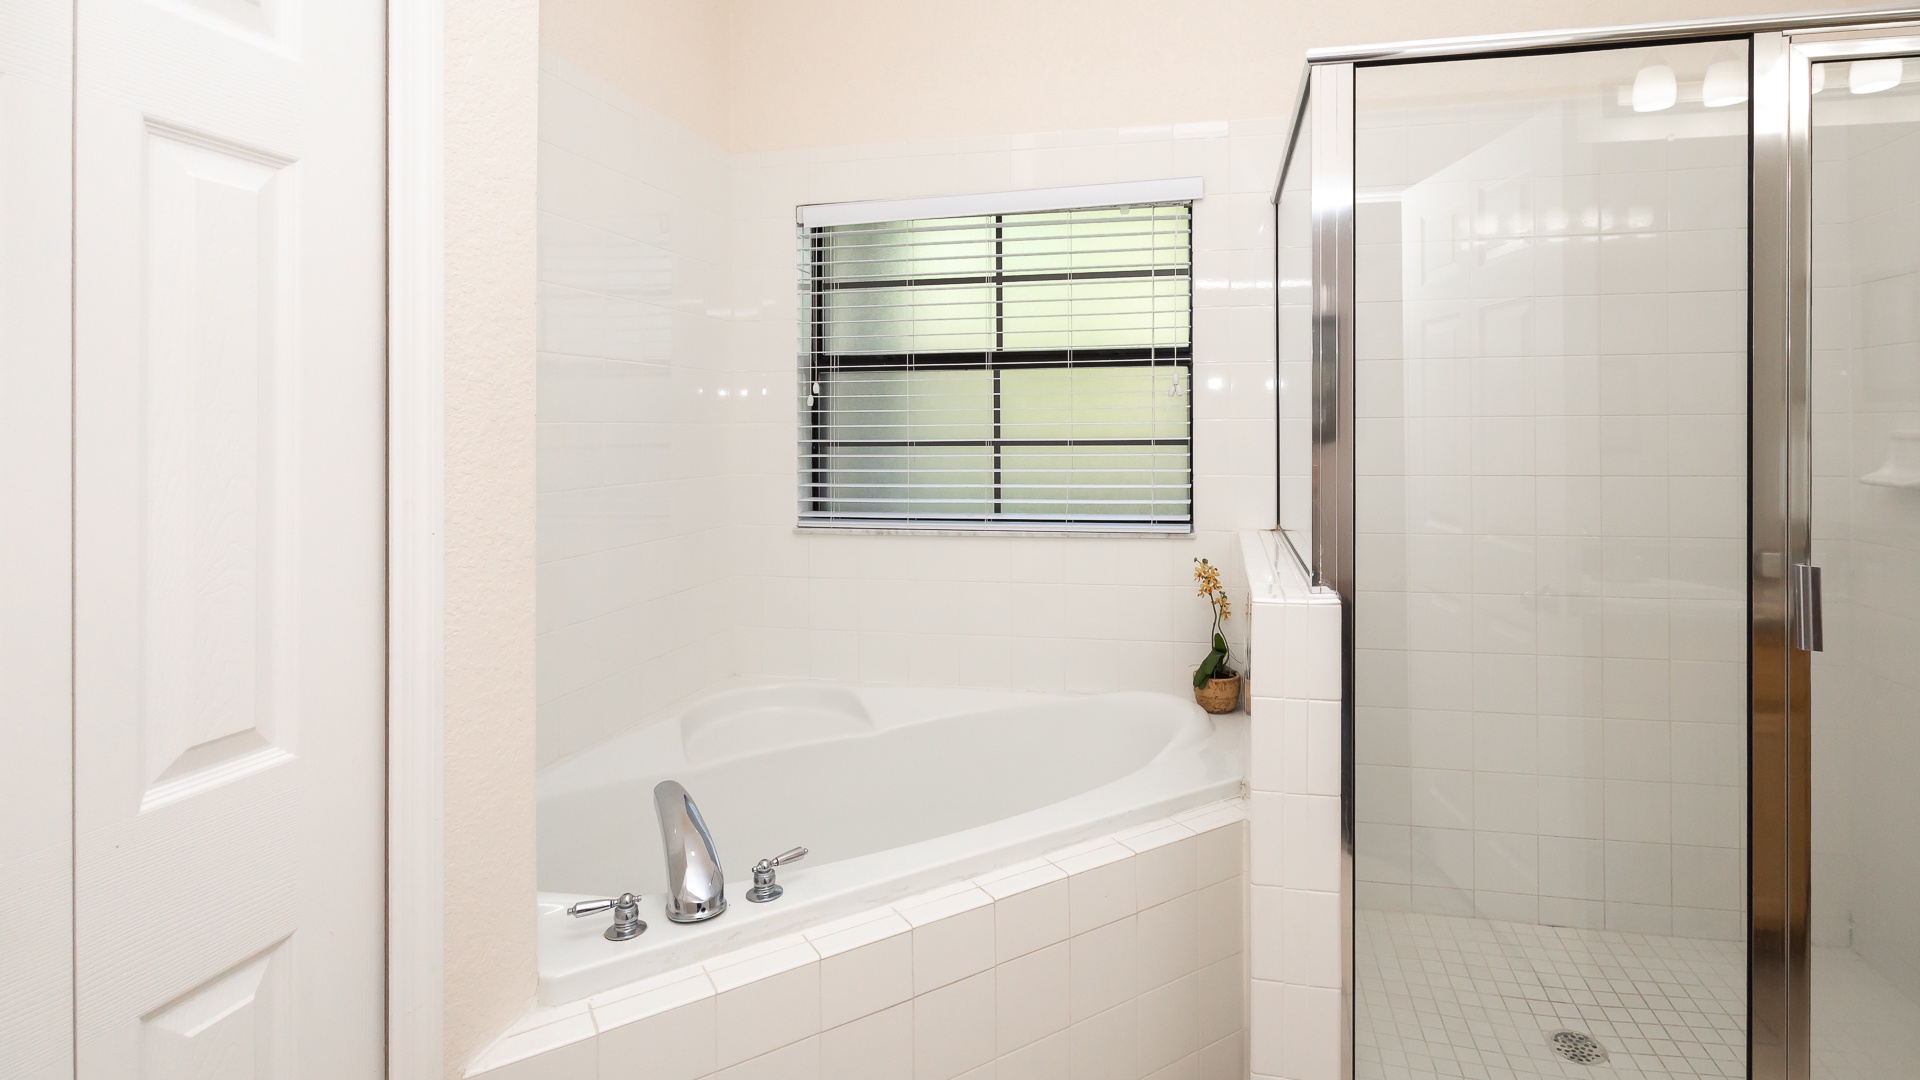 The king en suite offers a dual vanity, glass shower, & luxurious soaking tub